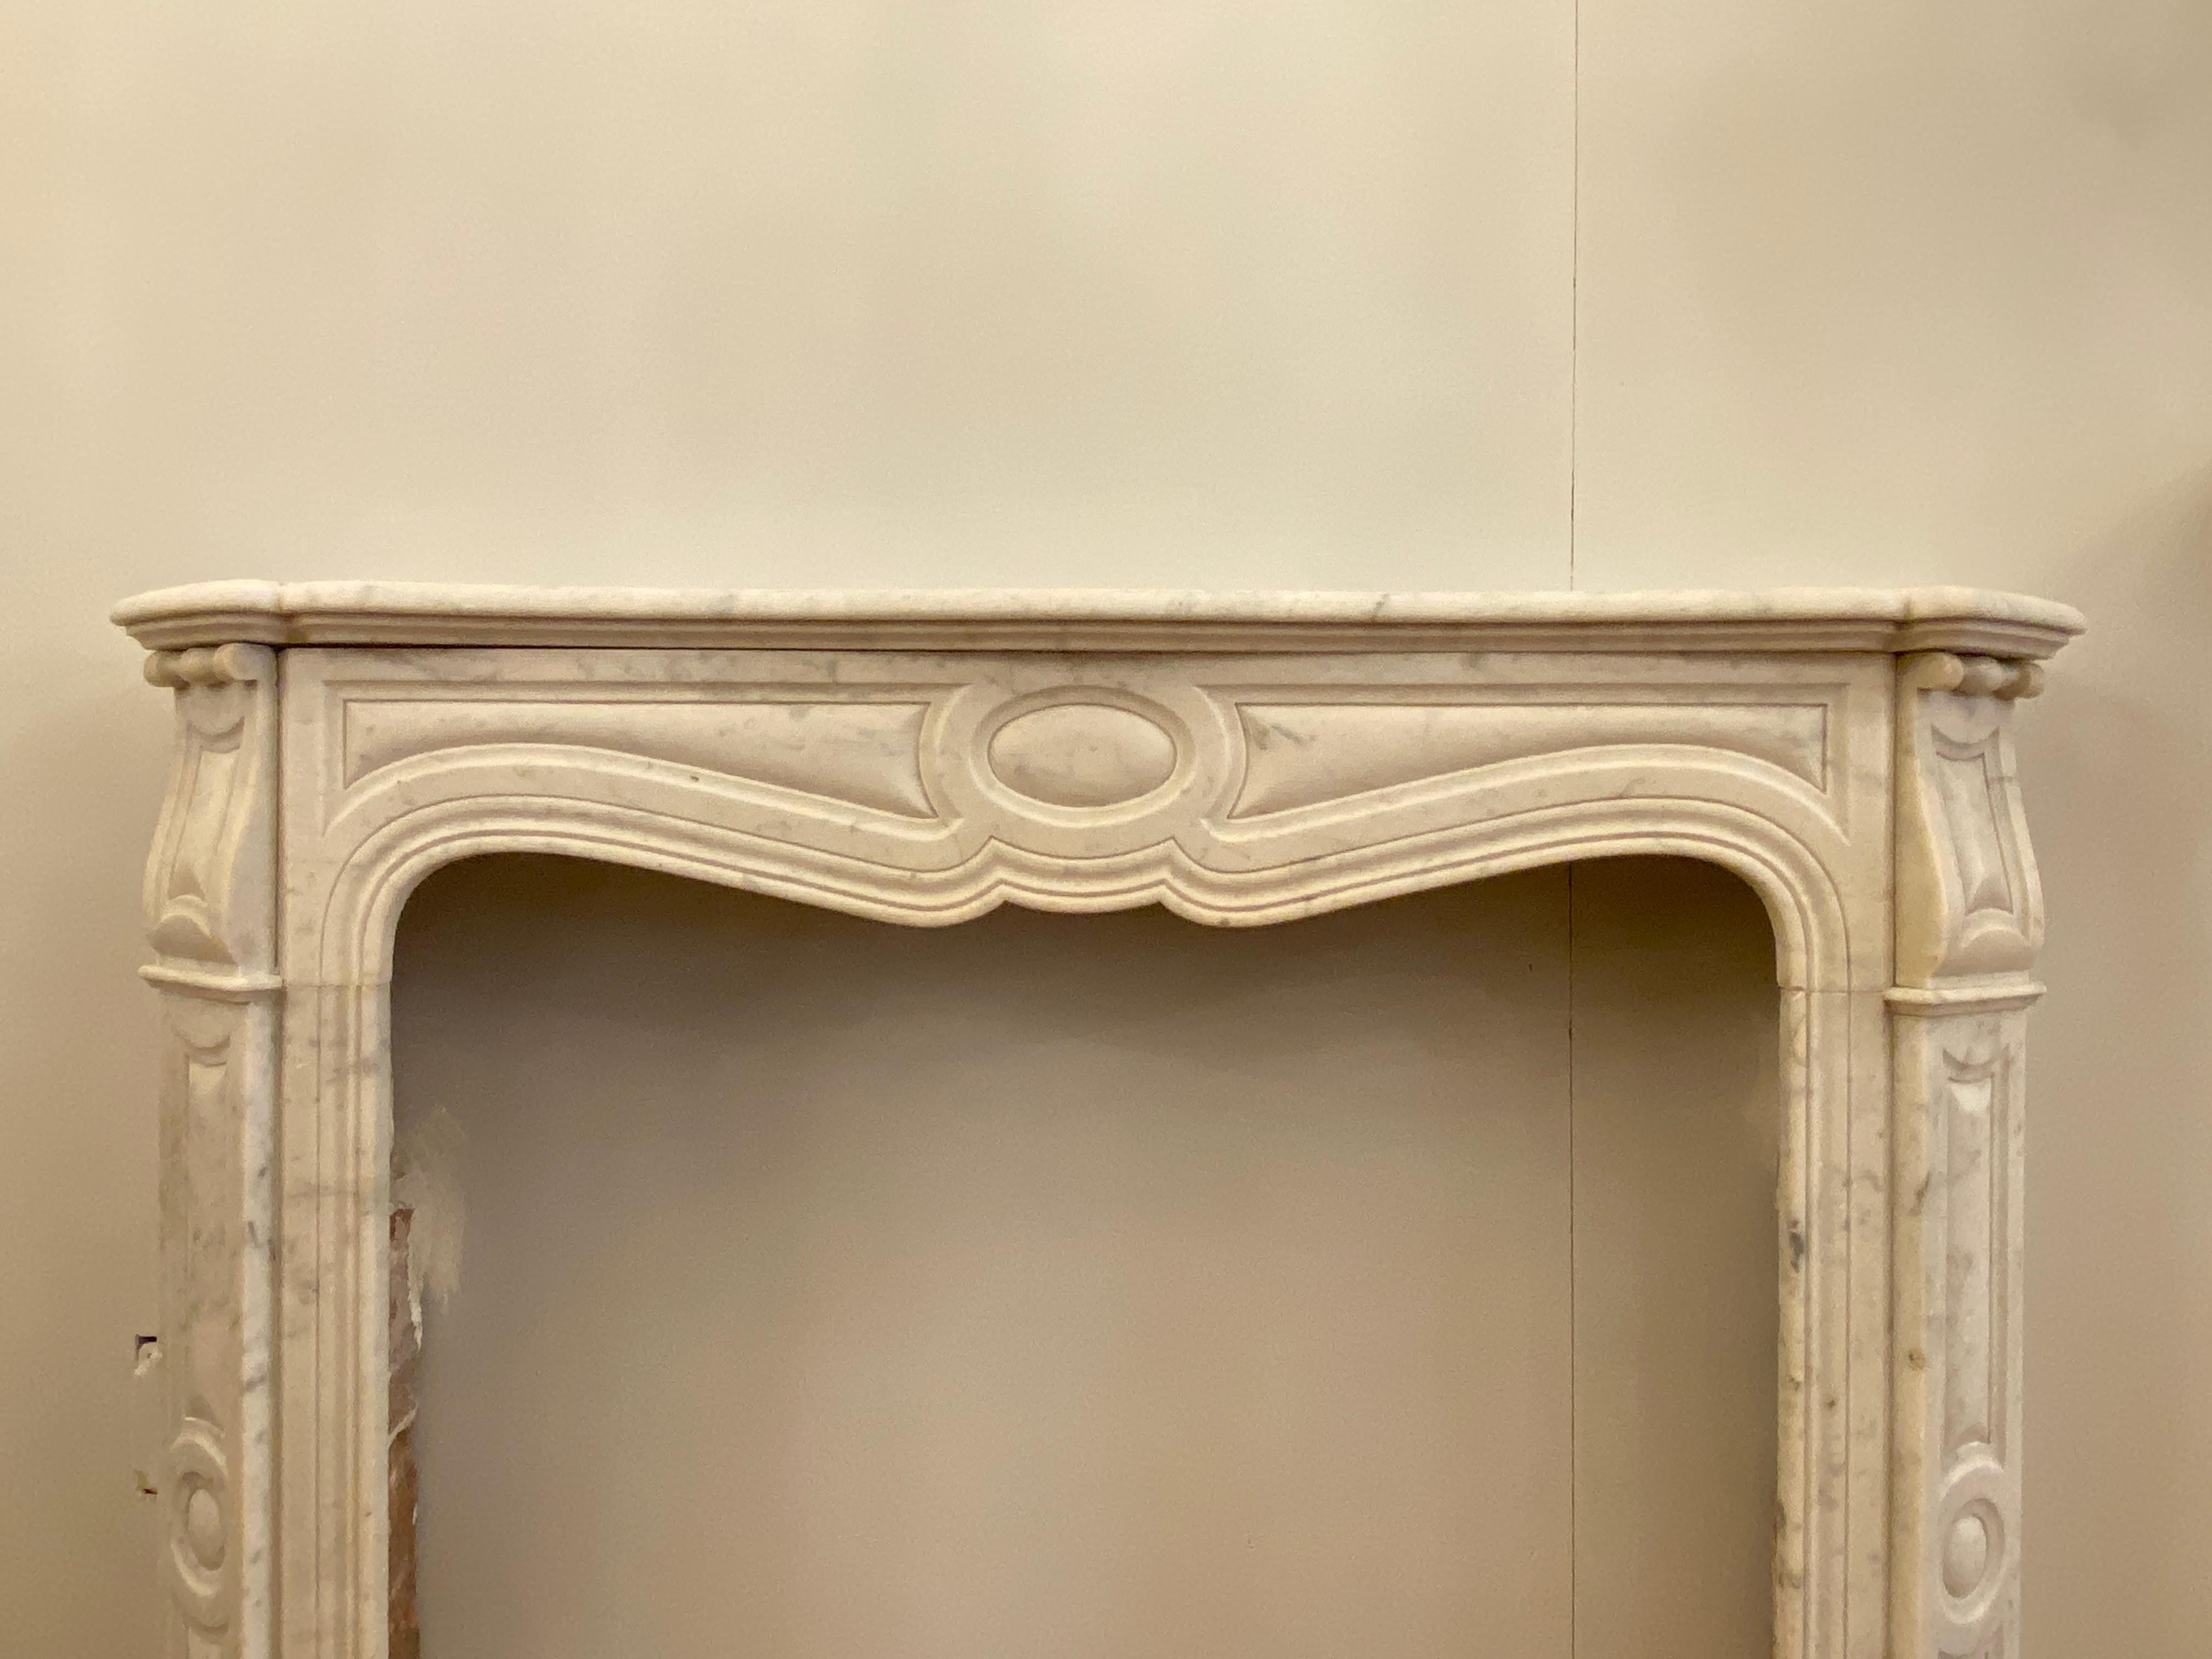 1910s Petite French White Carrara Marble Mantel from West 9th St in Manhattan 2